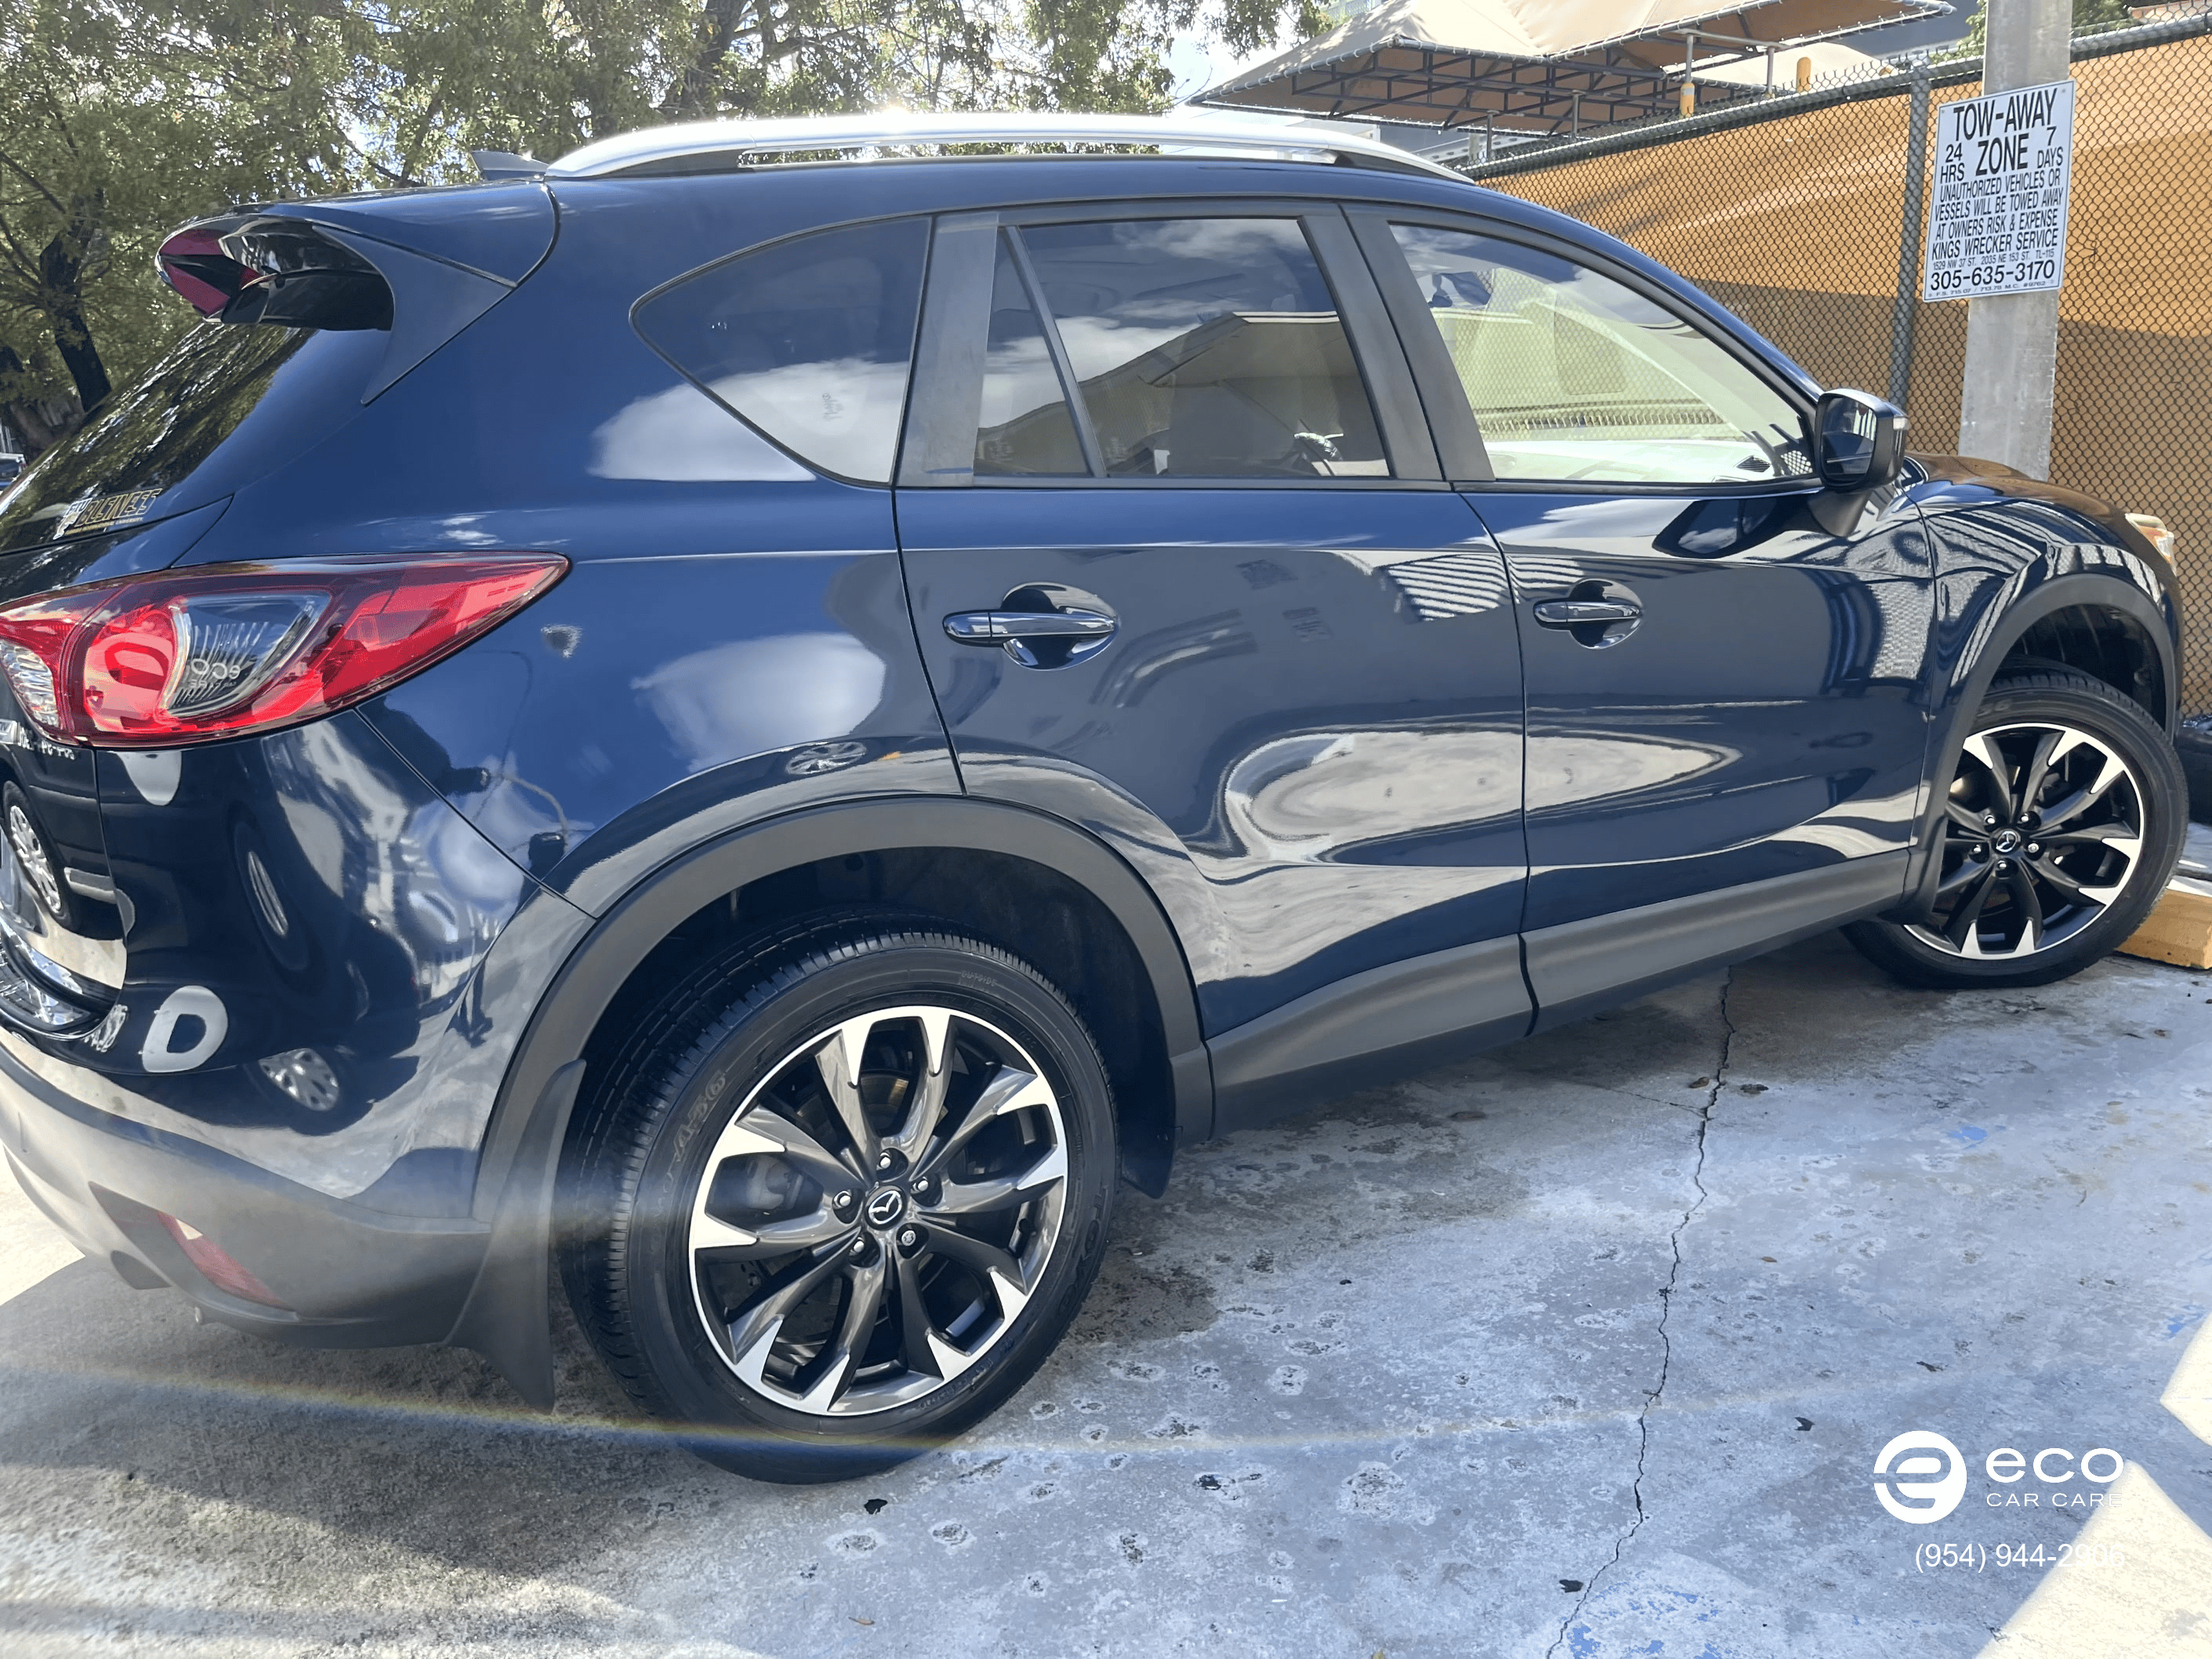 window tinting carbon film for suvs 2 front windows